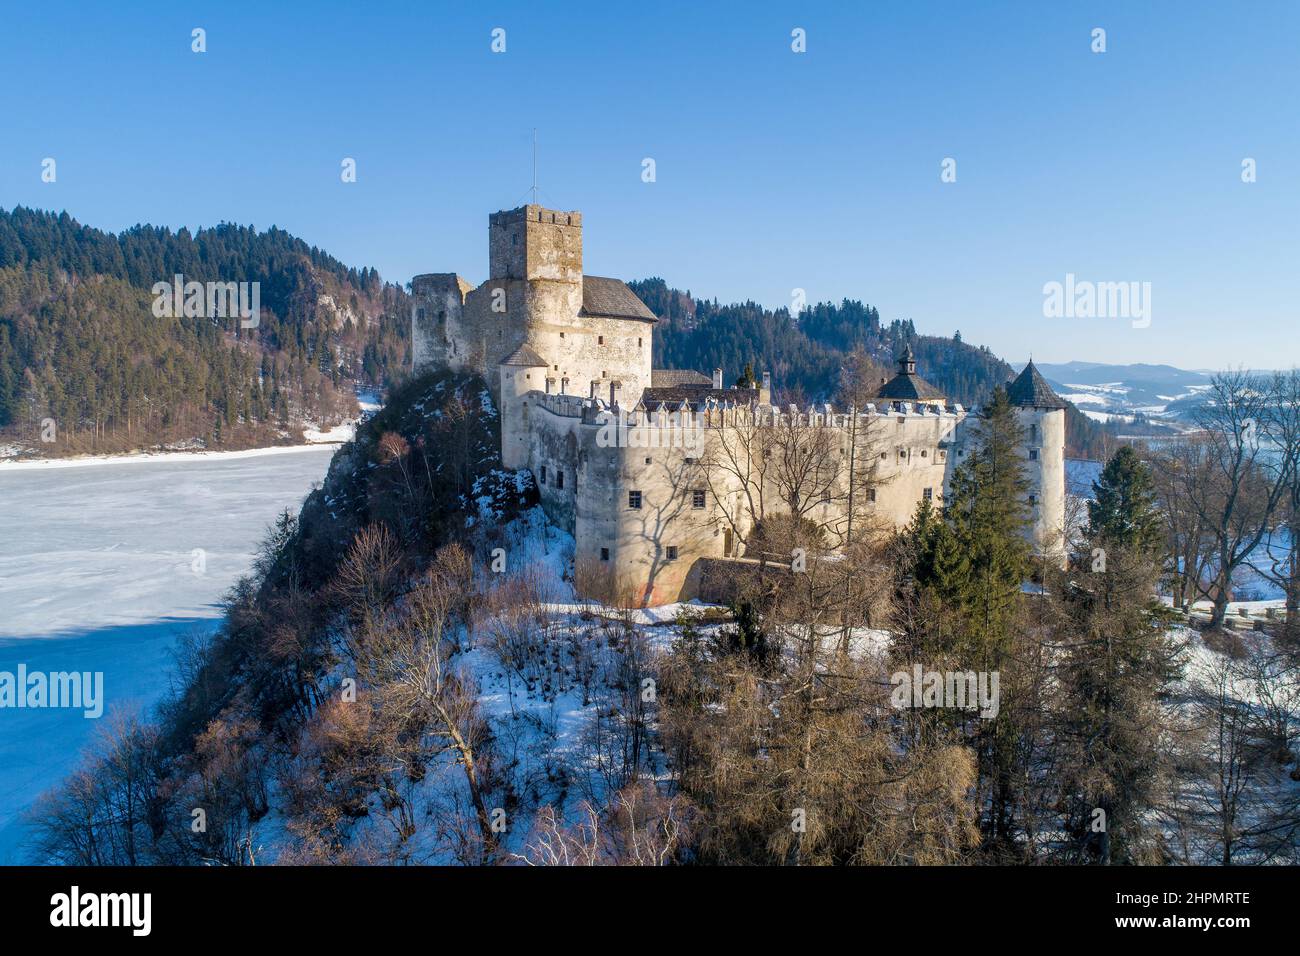 Poland. Medieval castle in Niedzica, dating back to 14th century (upper castle) in winter. Frozen artificial Czorsztyn lake on Dunajec river Stock Photo